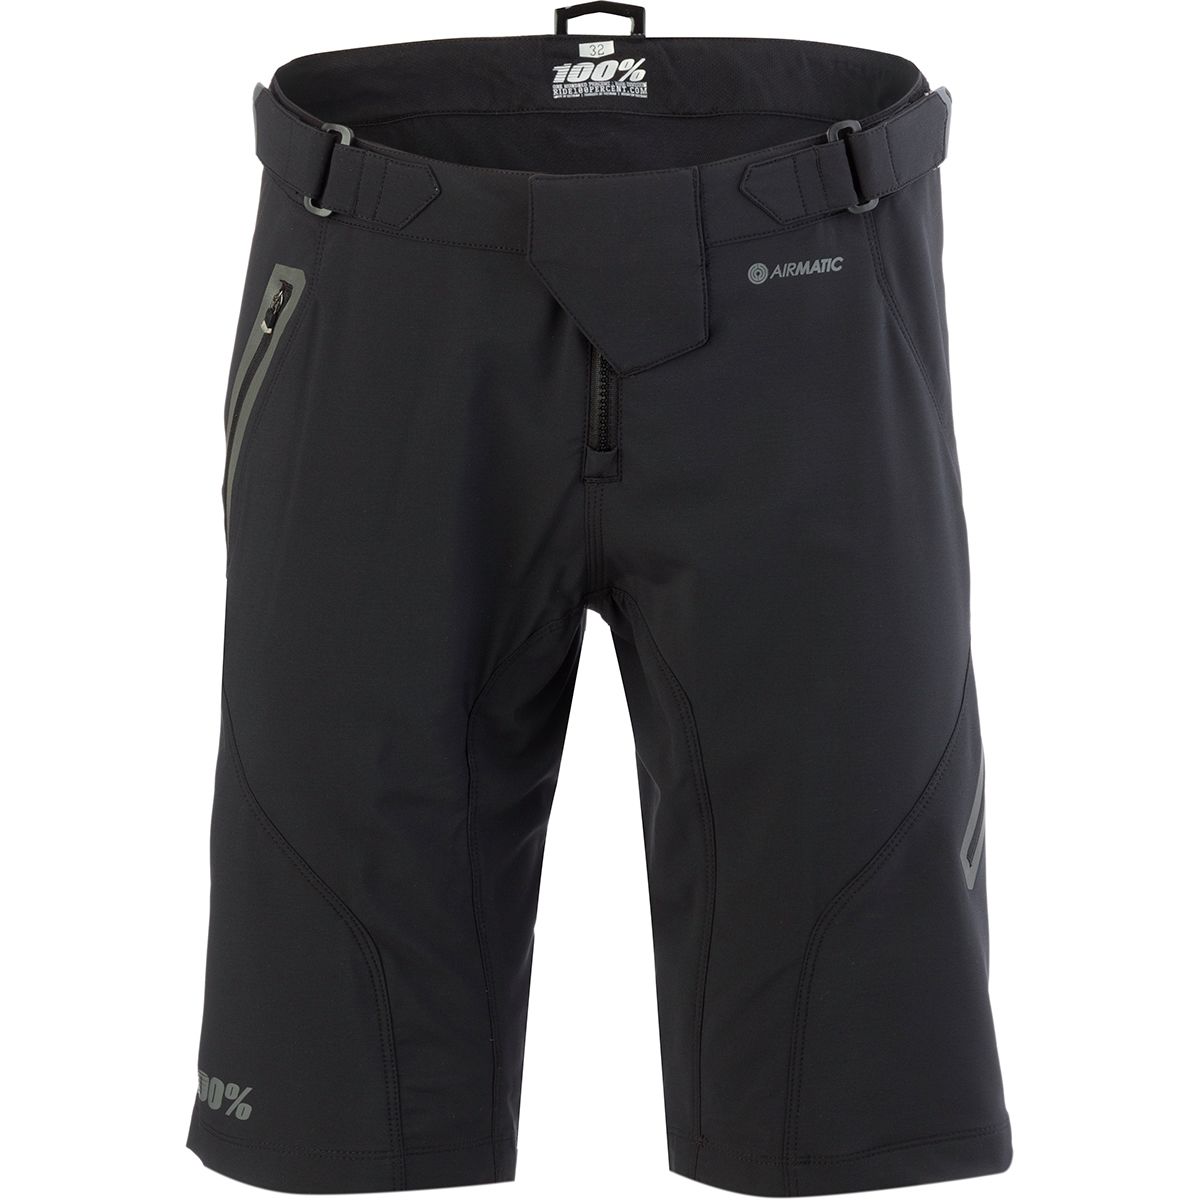 100% Airmatic Short without Liner - Men's